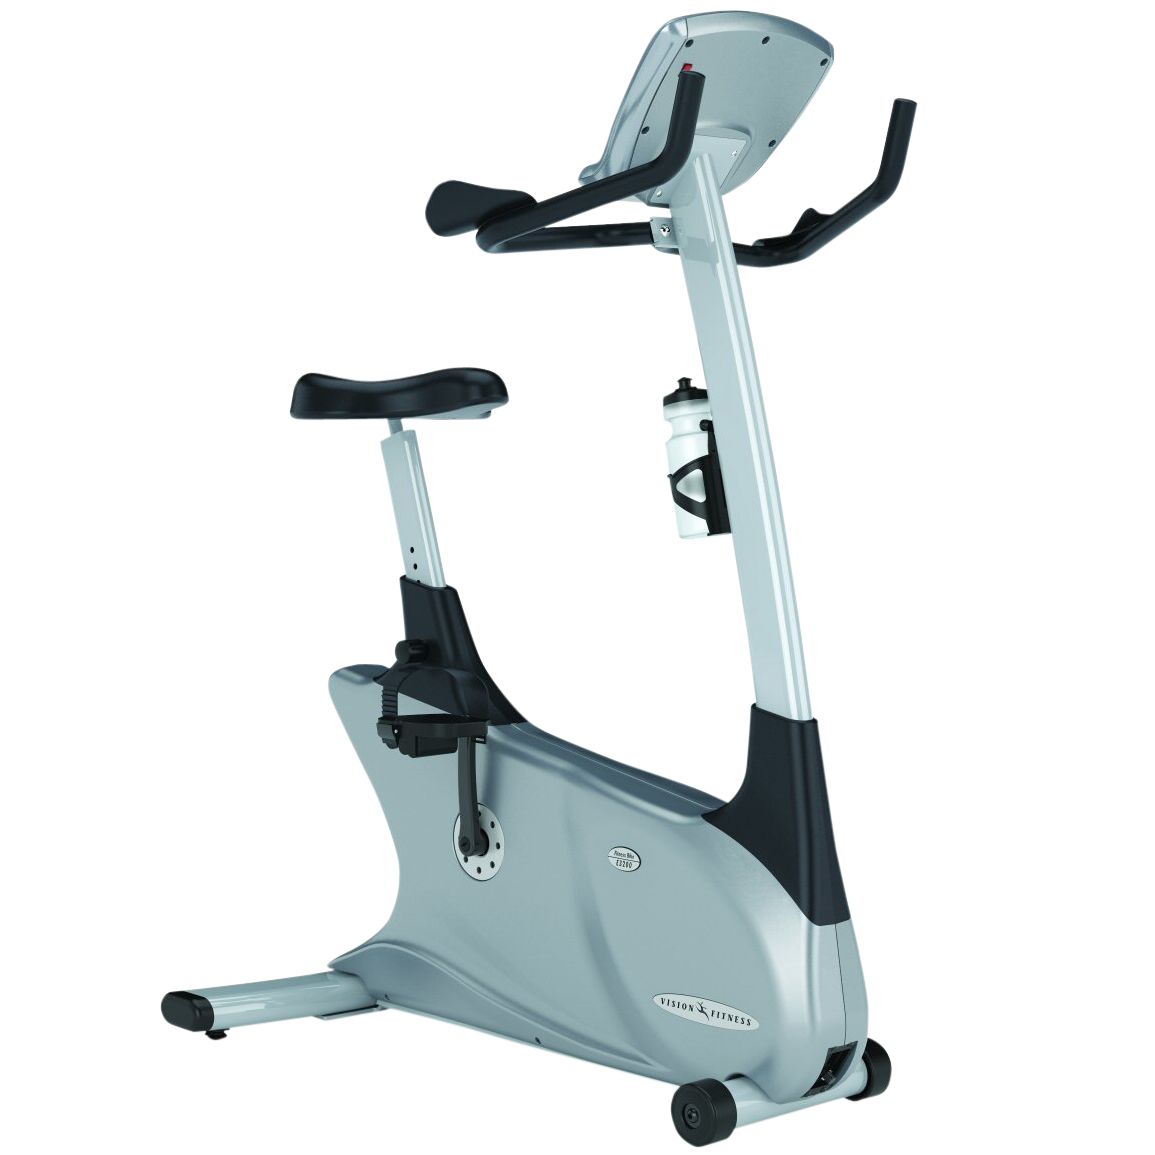 Vision Fitness E3200 Upright Exercise Bike with Premier Console at John Lewis